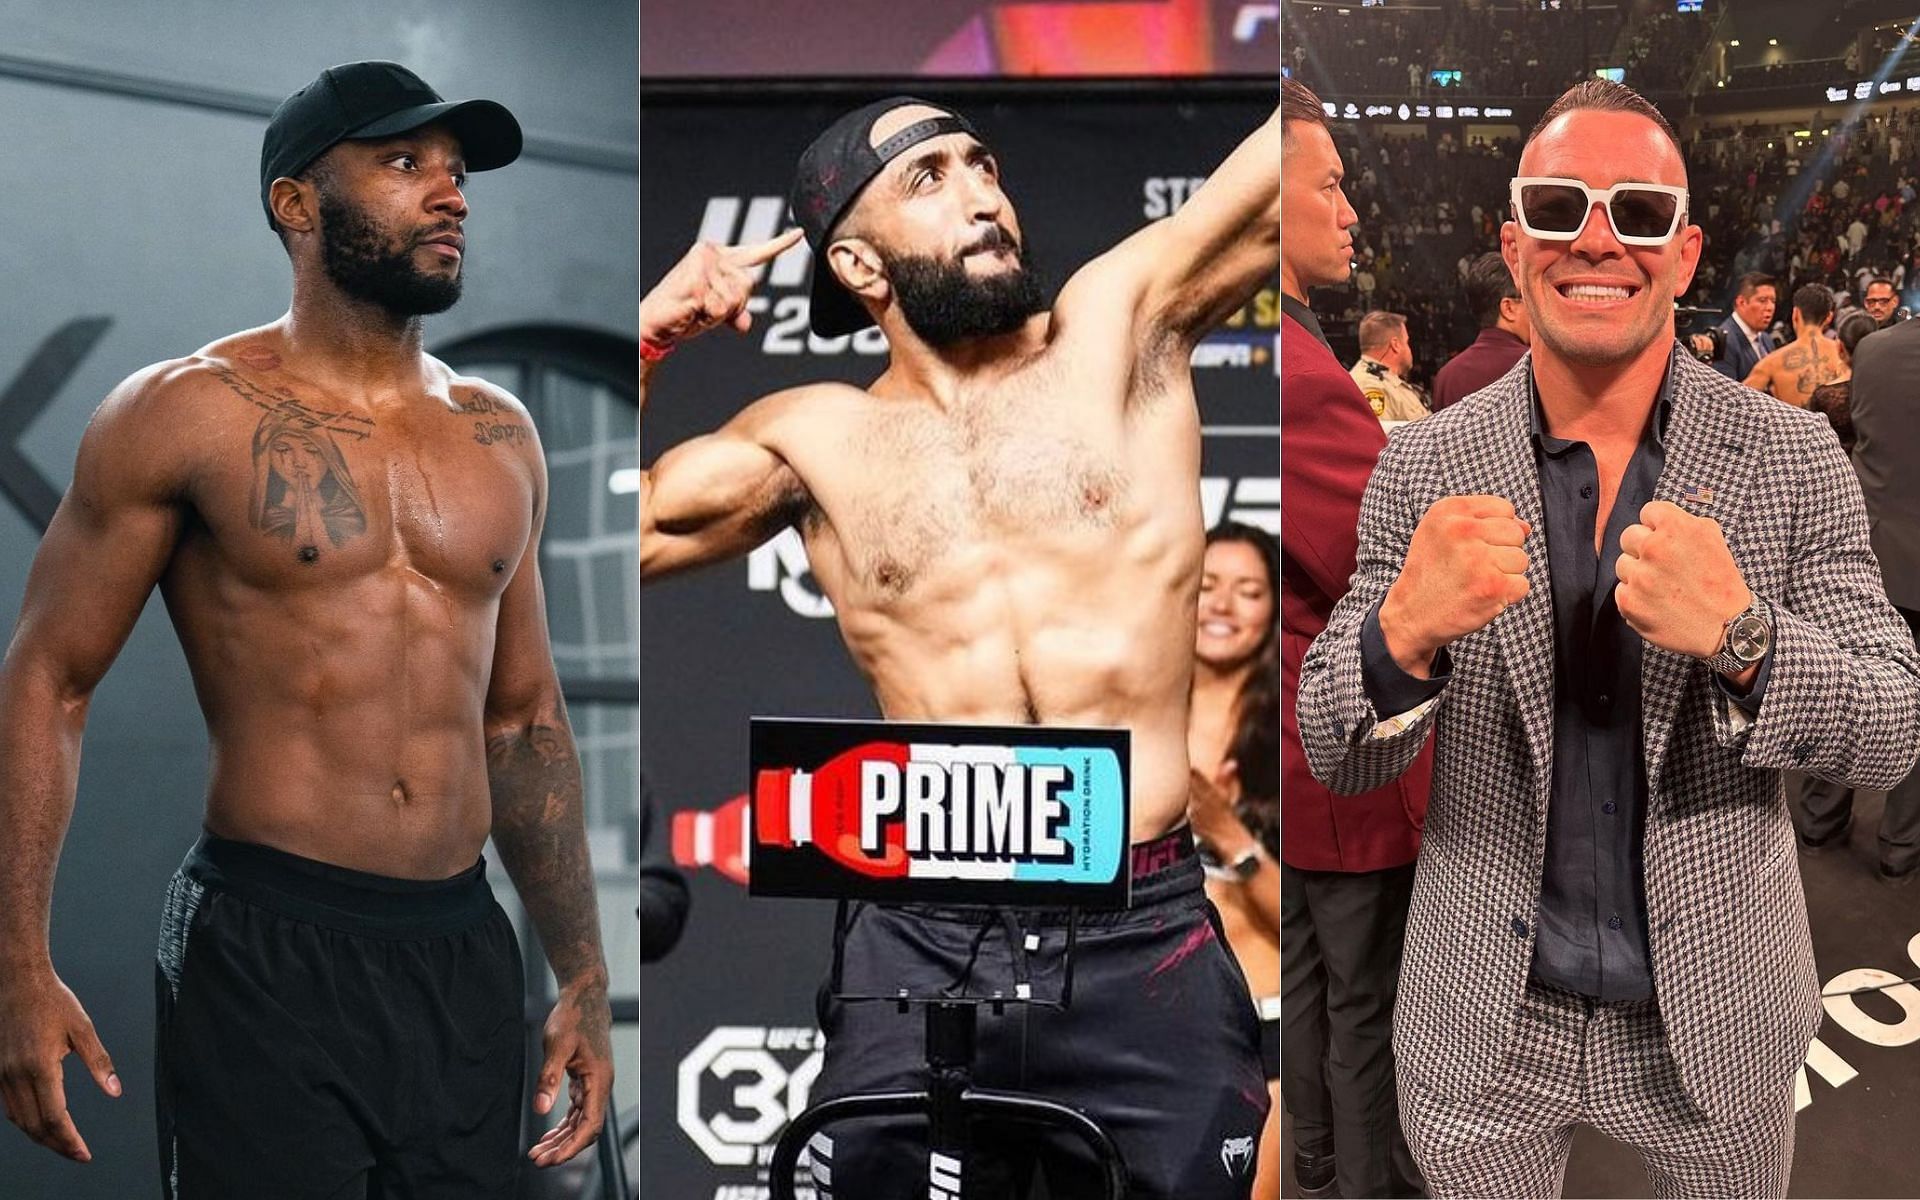 Belal Muhammad (middle) takes a dig at Leon Edwards (left) and Colby Covington (right) [Image credits: @bullyb170, @leonedwardsmma and @colbycovmma on Instagram]